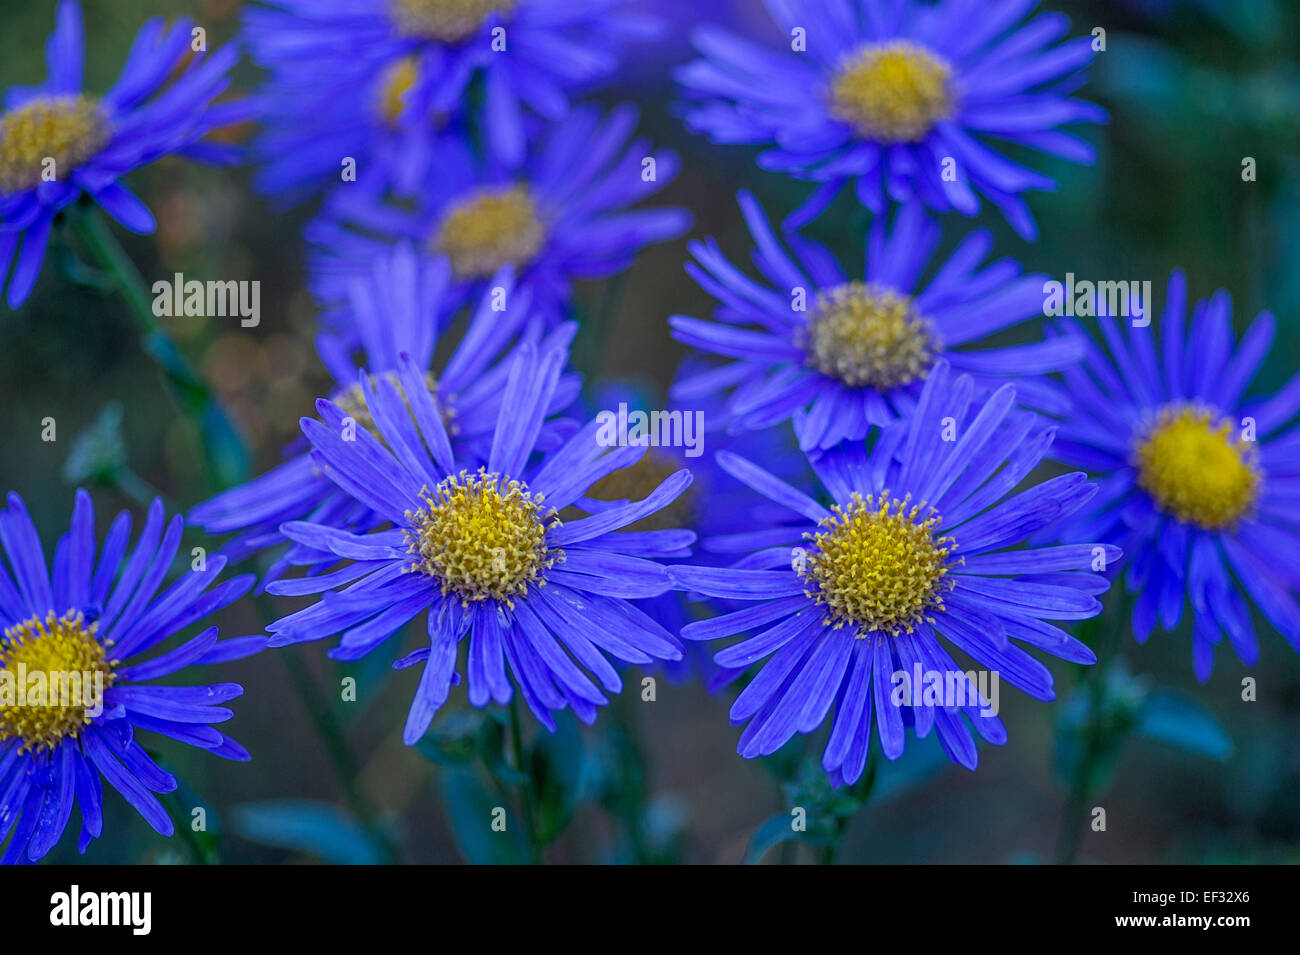 Aster amellus sp. Stock Photo